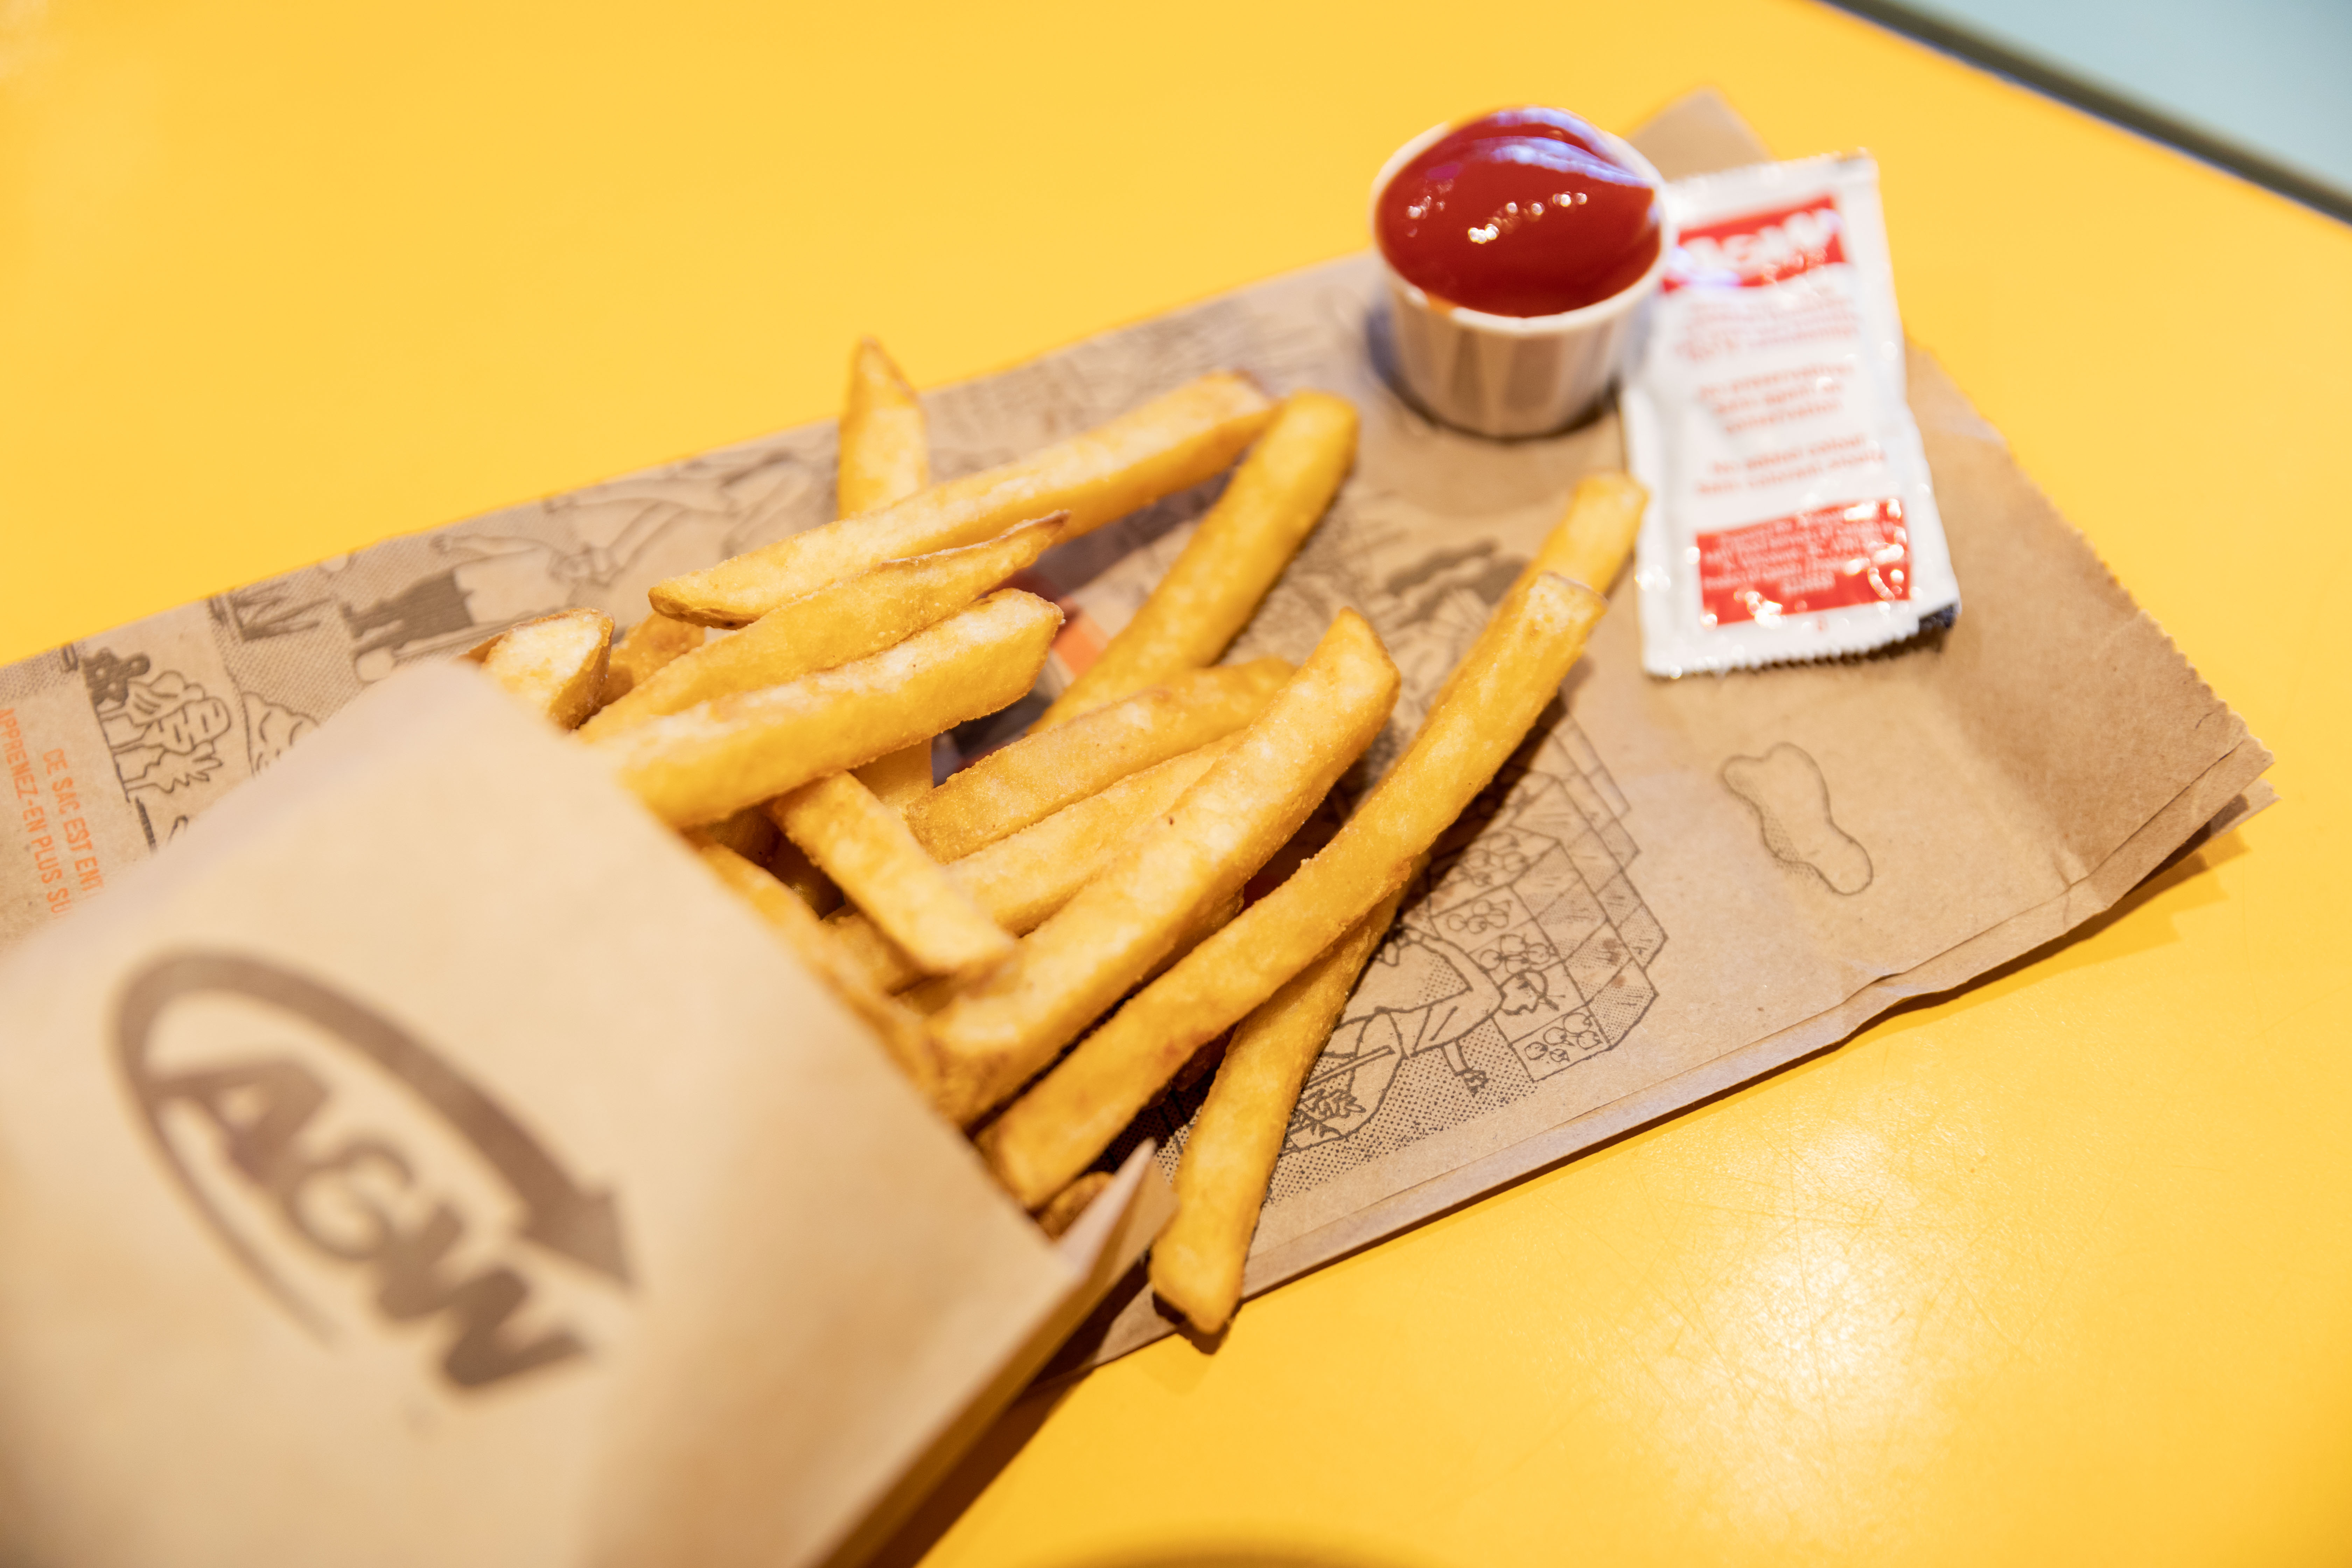 A&W fries and ketchup